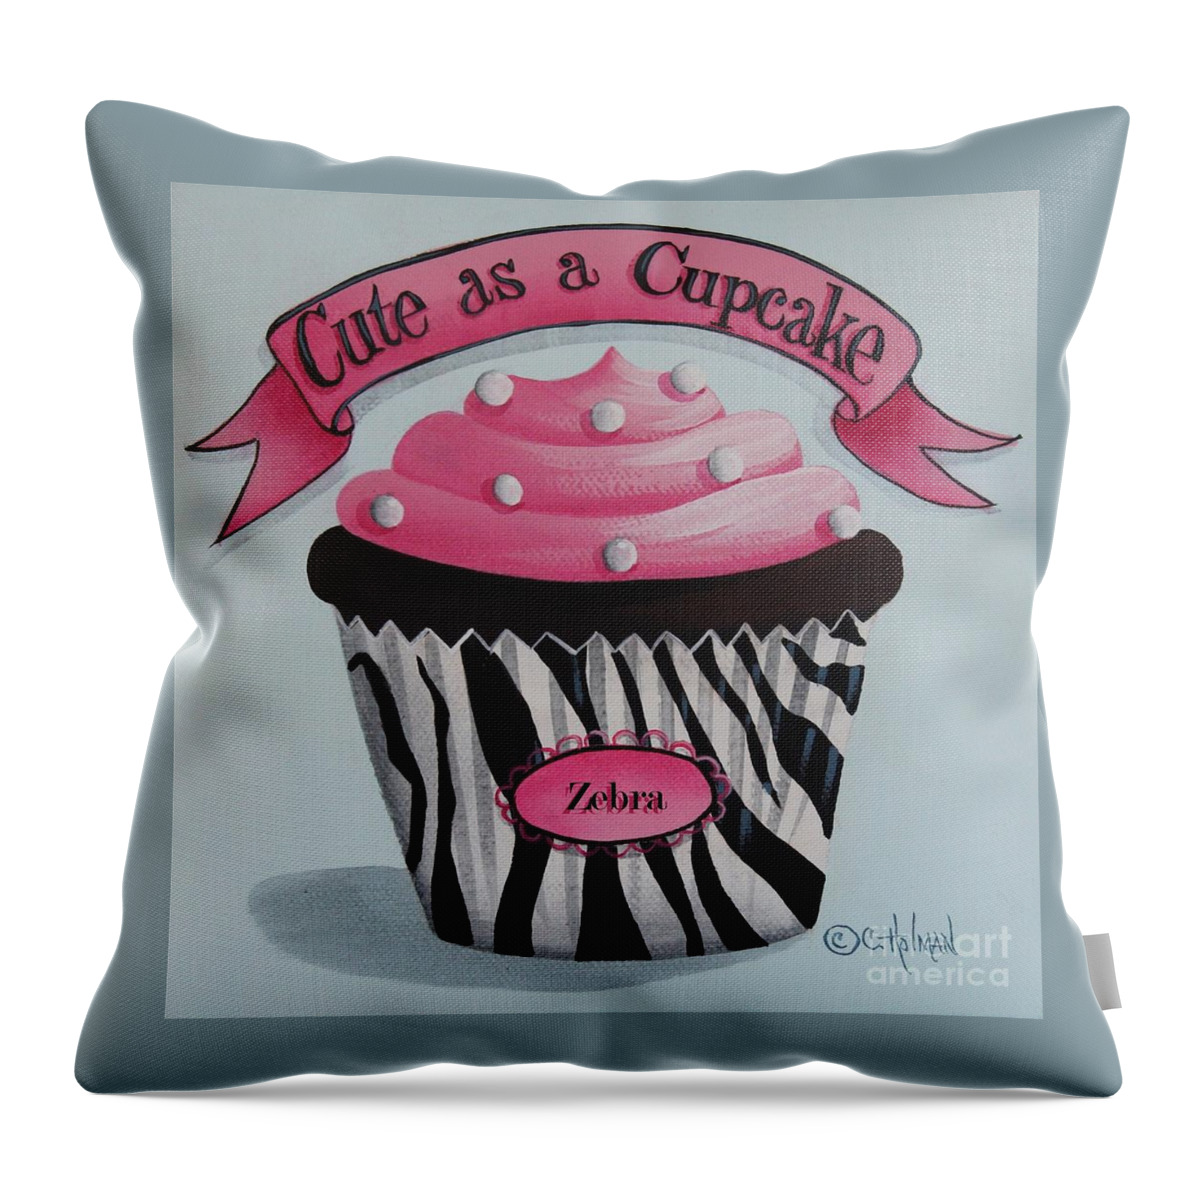 Art Throw Pillow featuring the painting Cute as a Cupcake by Catherine Holman